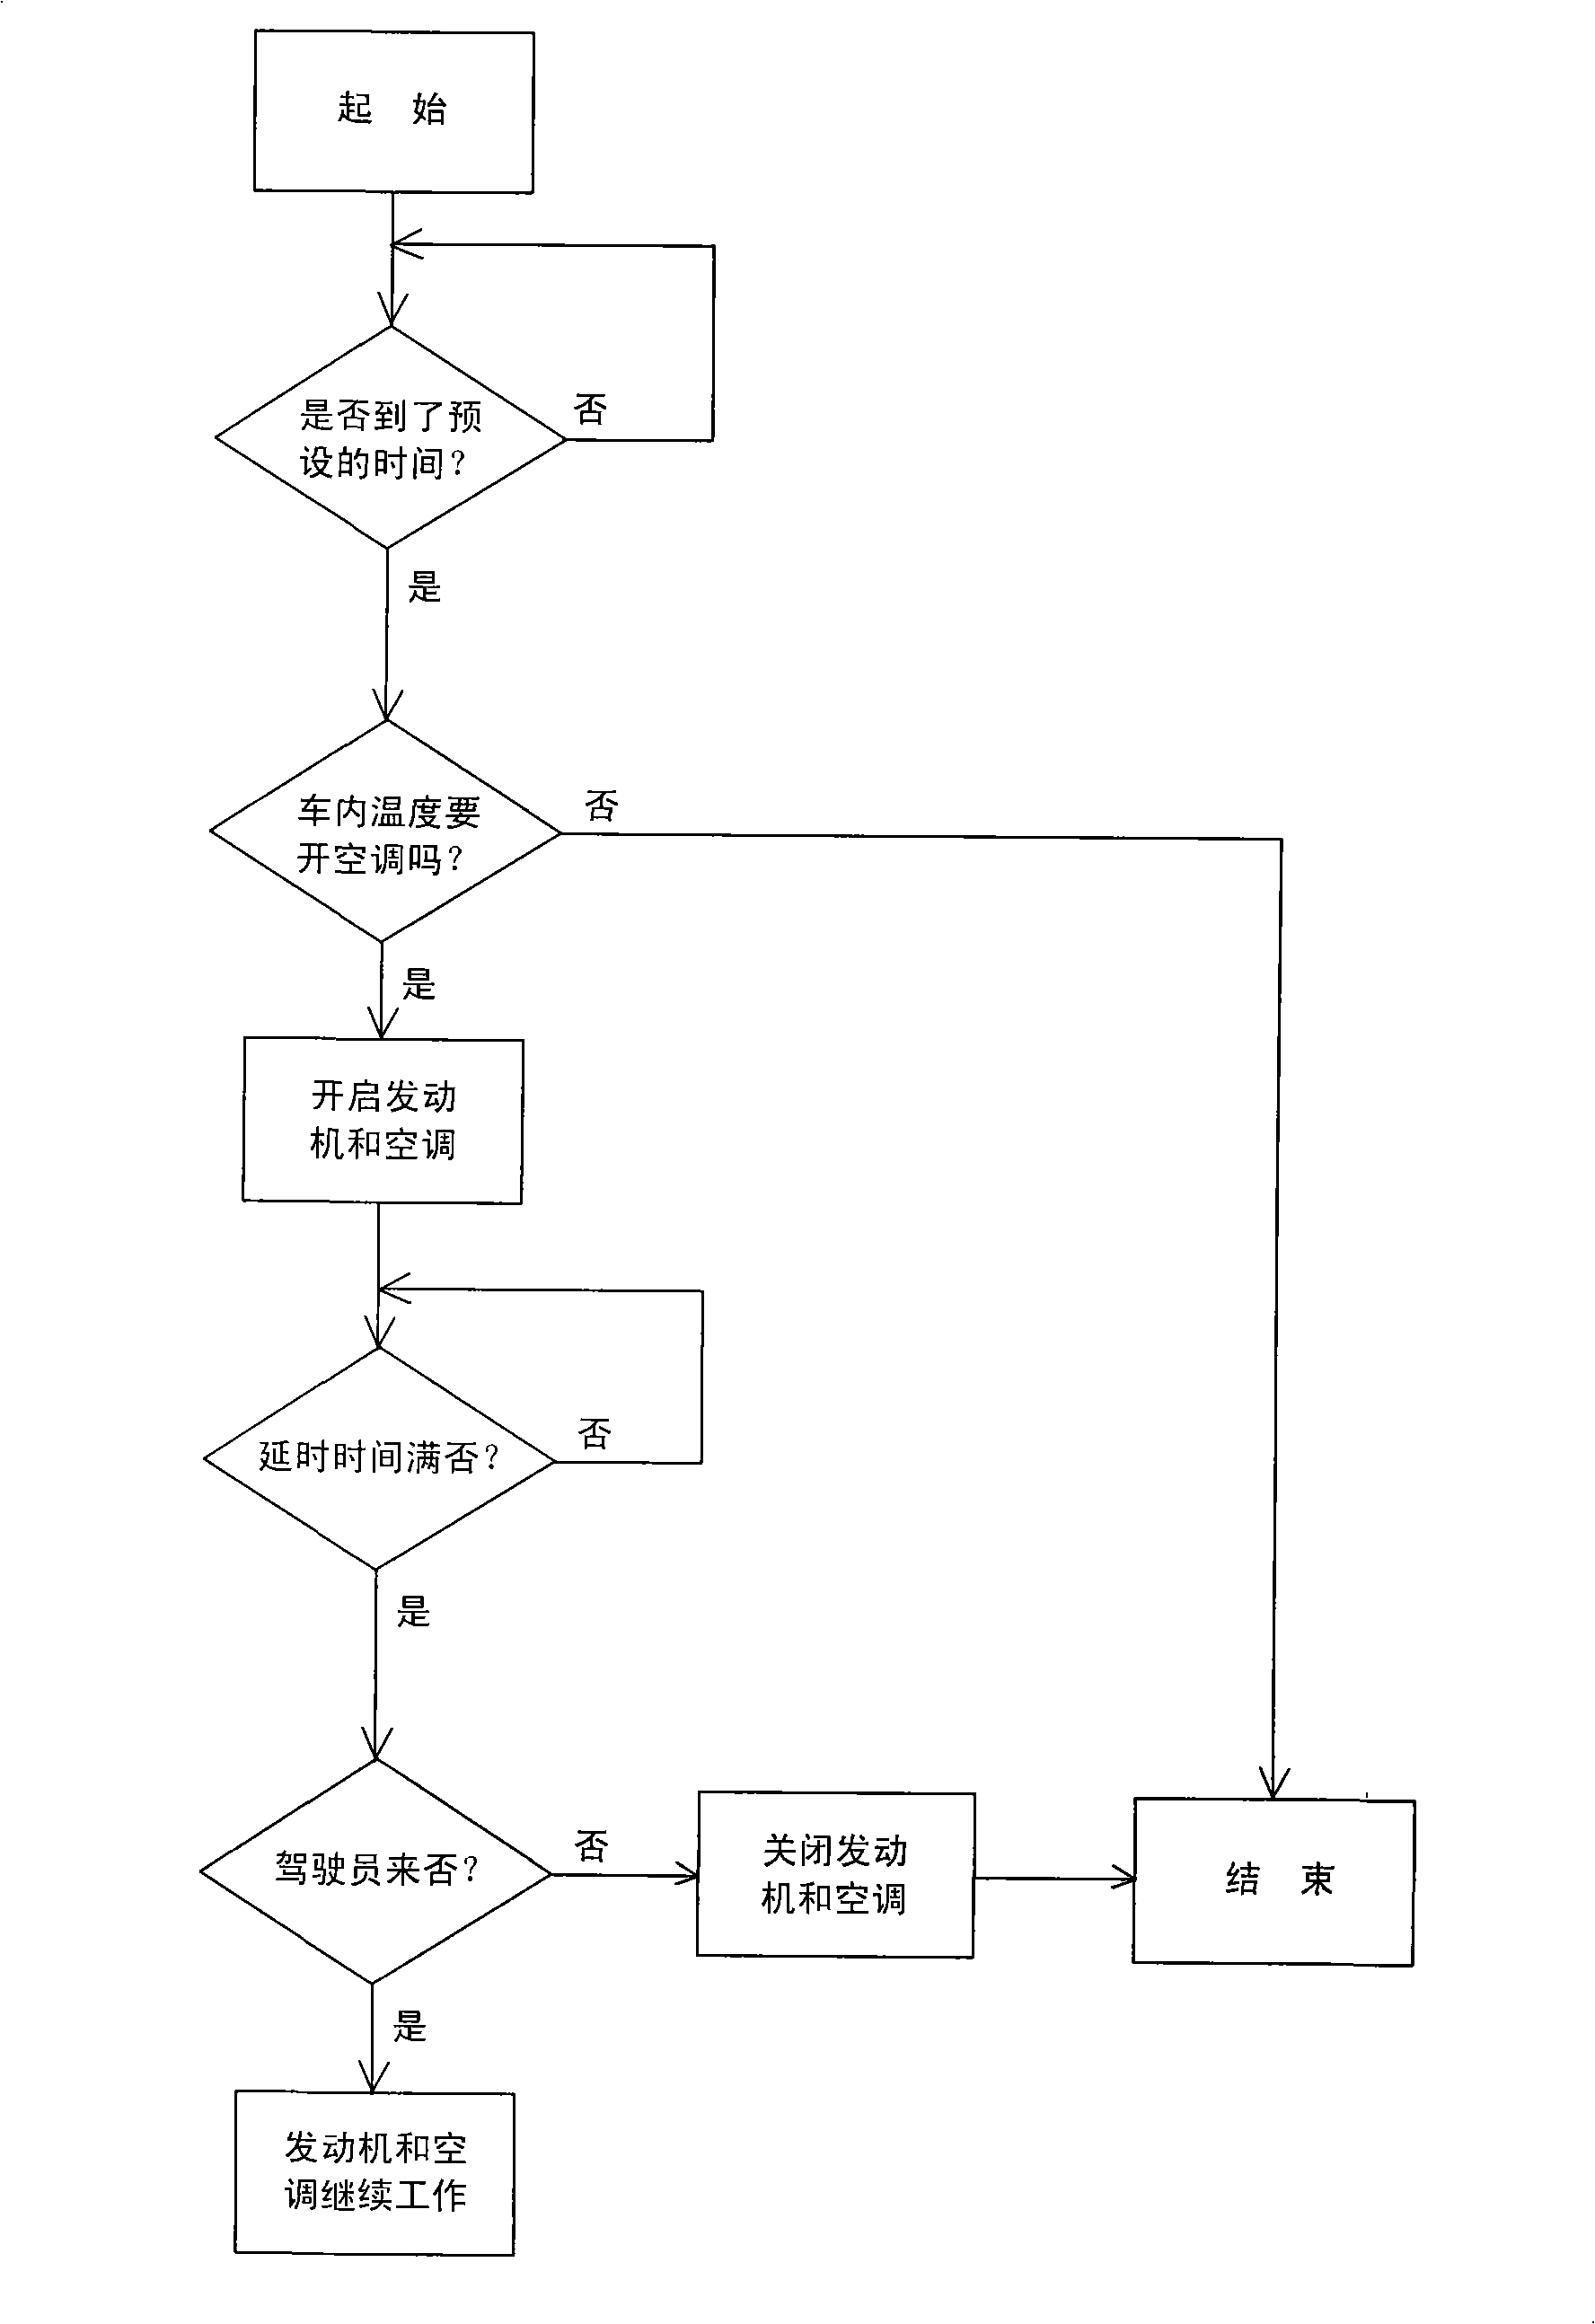 Method for preset opening of automobile air conditioner